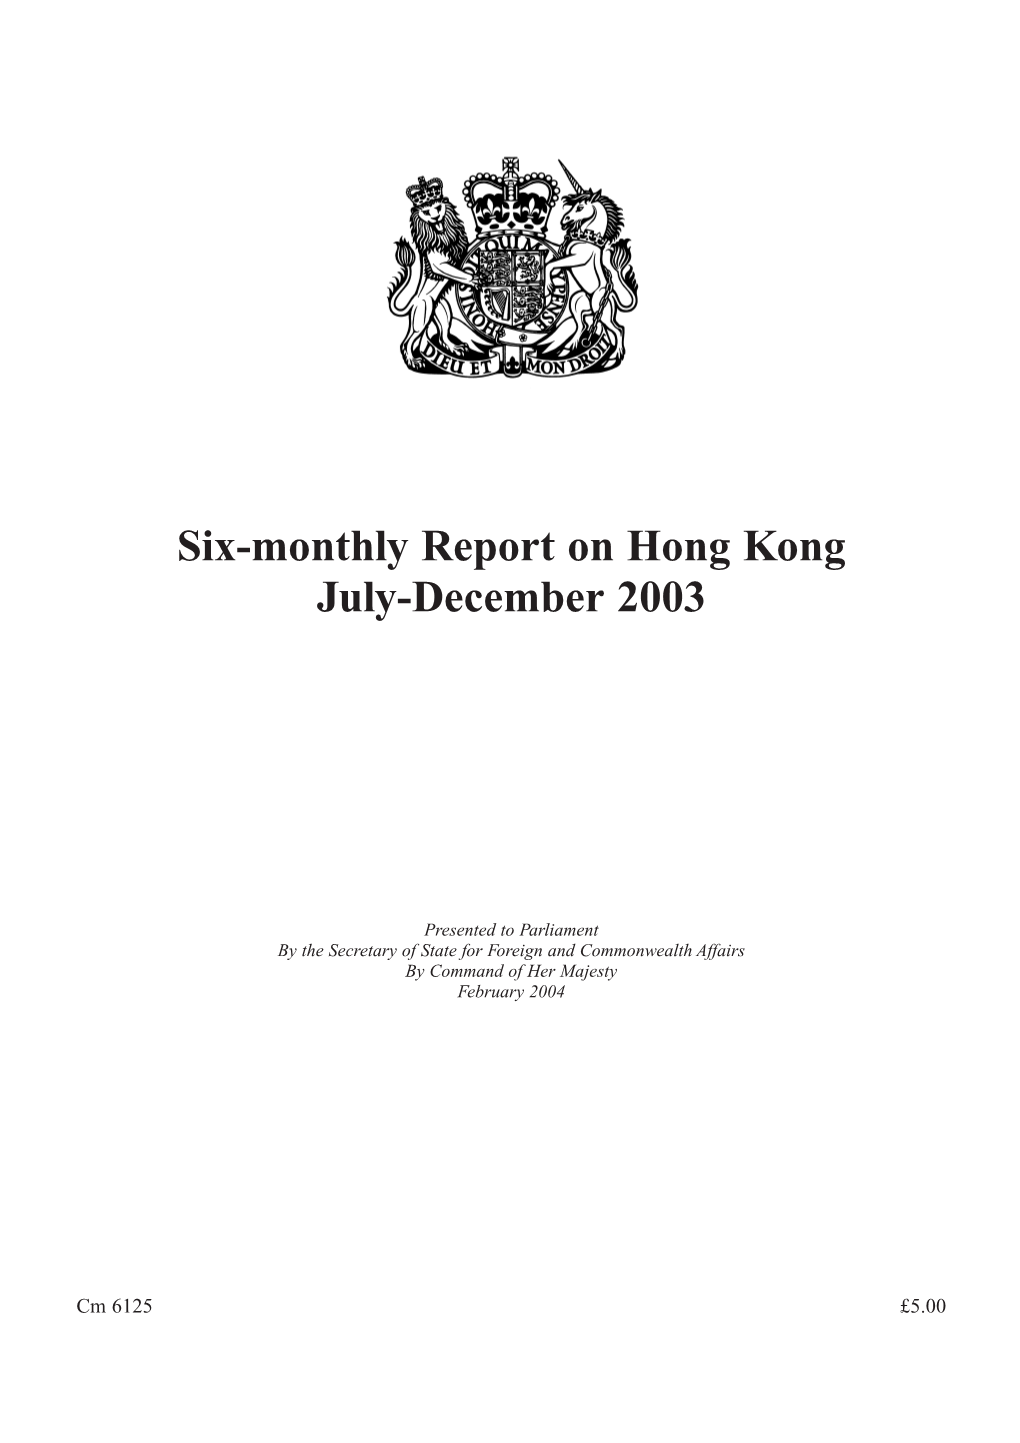 Six-Monthly Report on Hong Kong July-December 2003